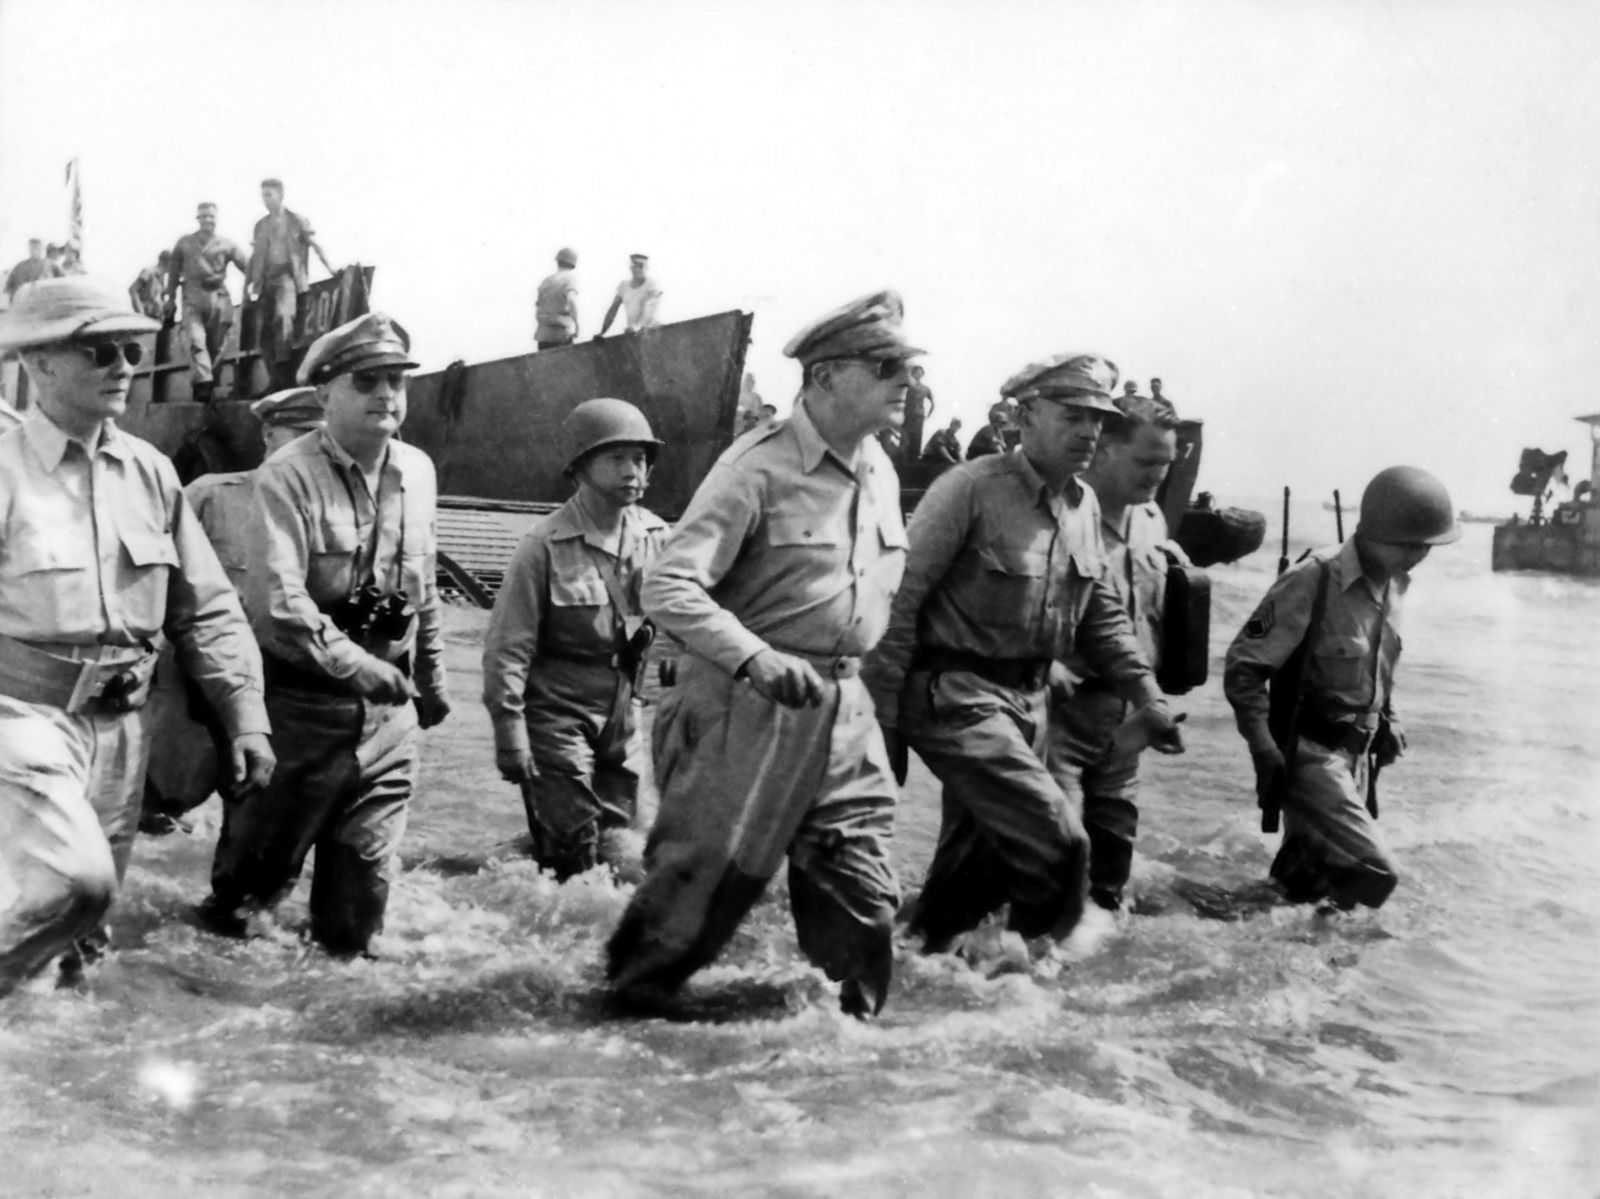 Photo of Douglas MacArthur surrounded by officers wading through water on a beach with ships and soldiers behind